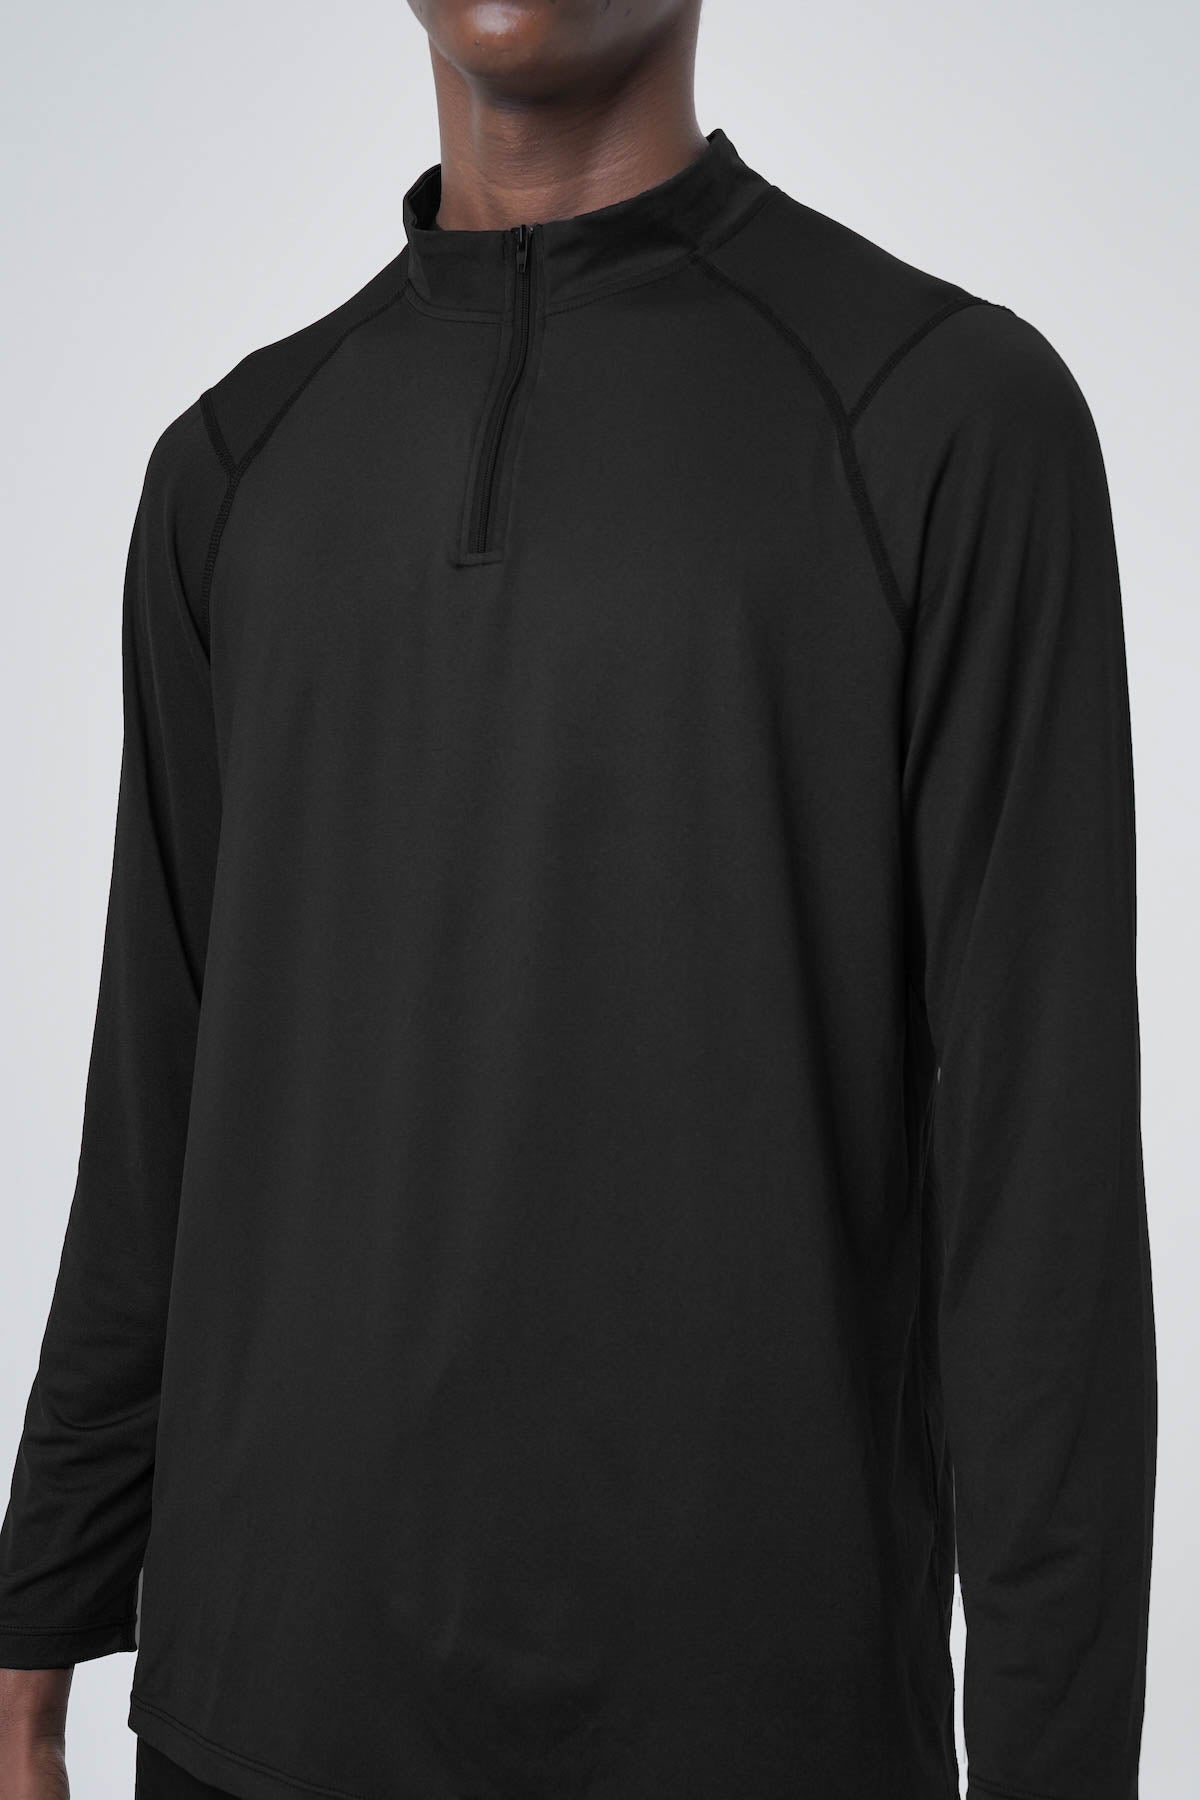 Pound Long Sleeve Top In Black